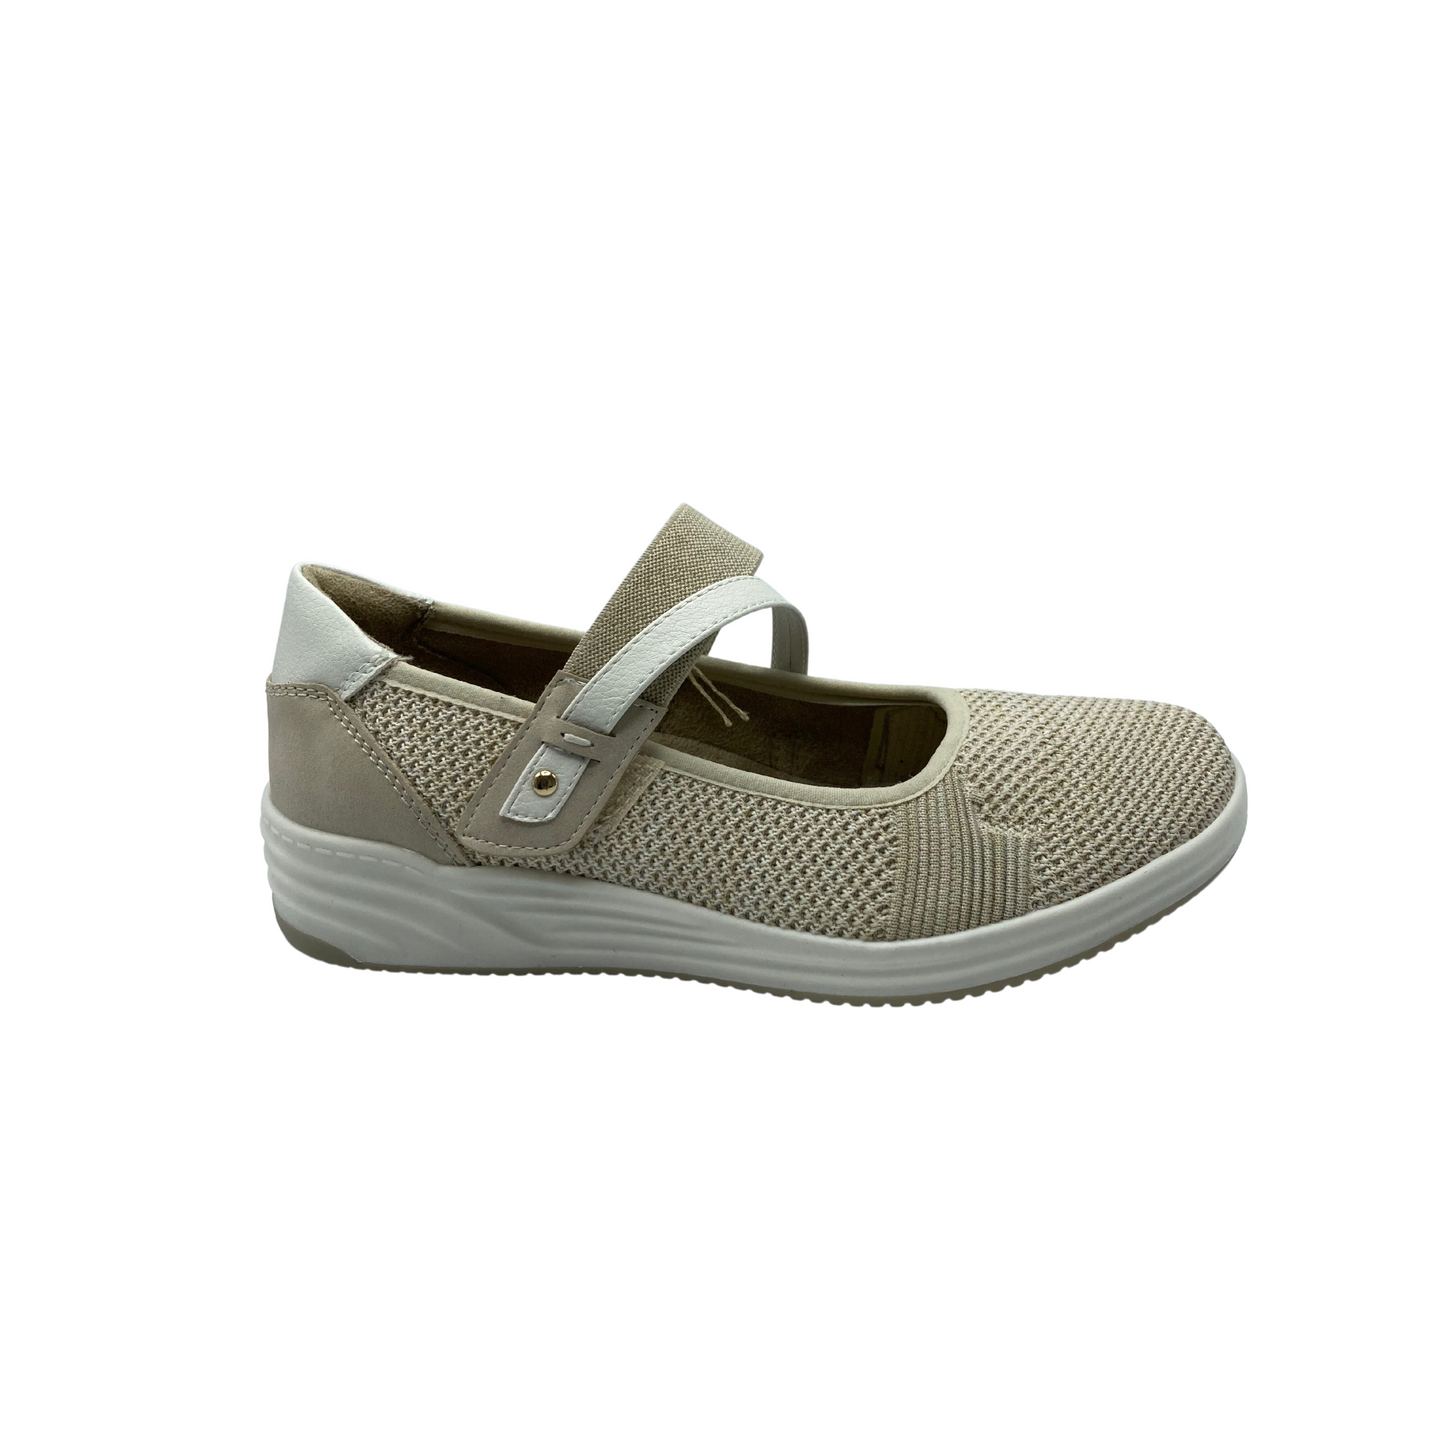 Outside view of Mary Jane style shoe done in a cream, non leather material.  Double cross straps have velcro adjustment